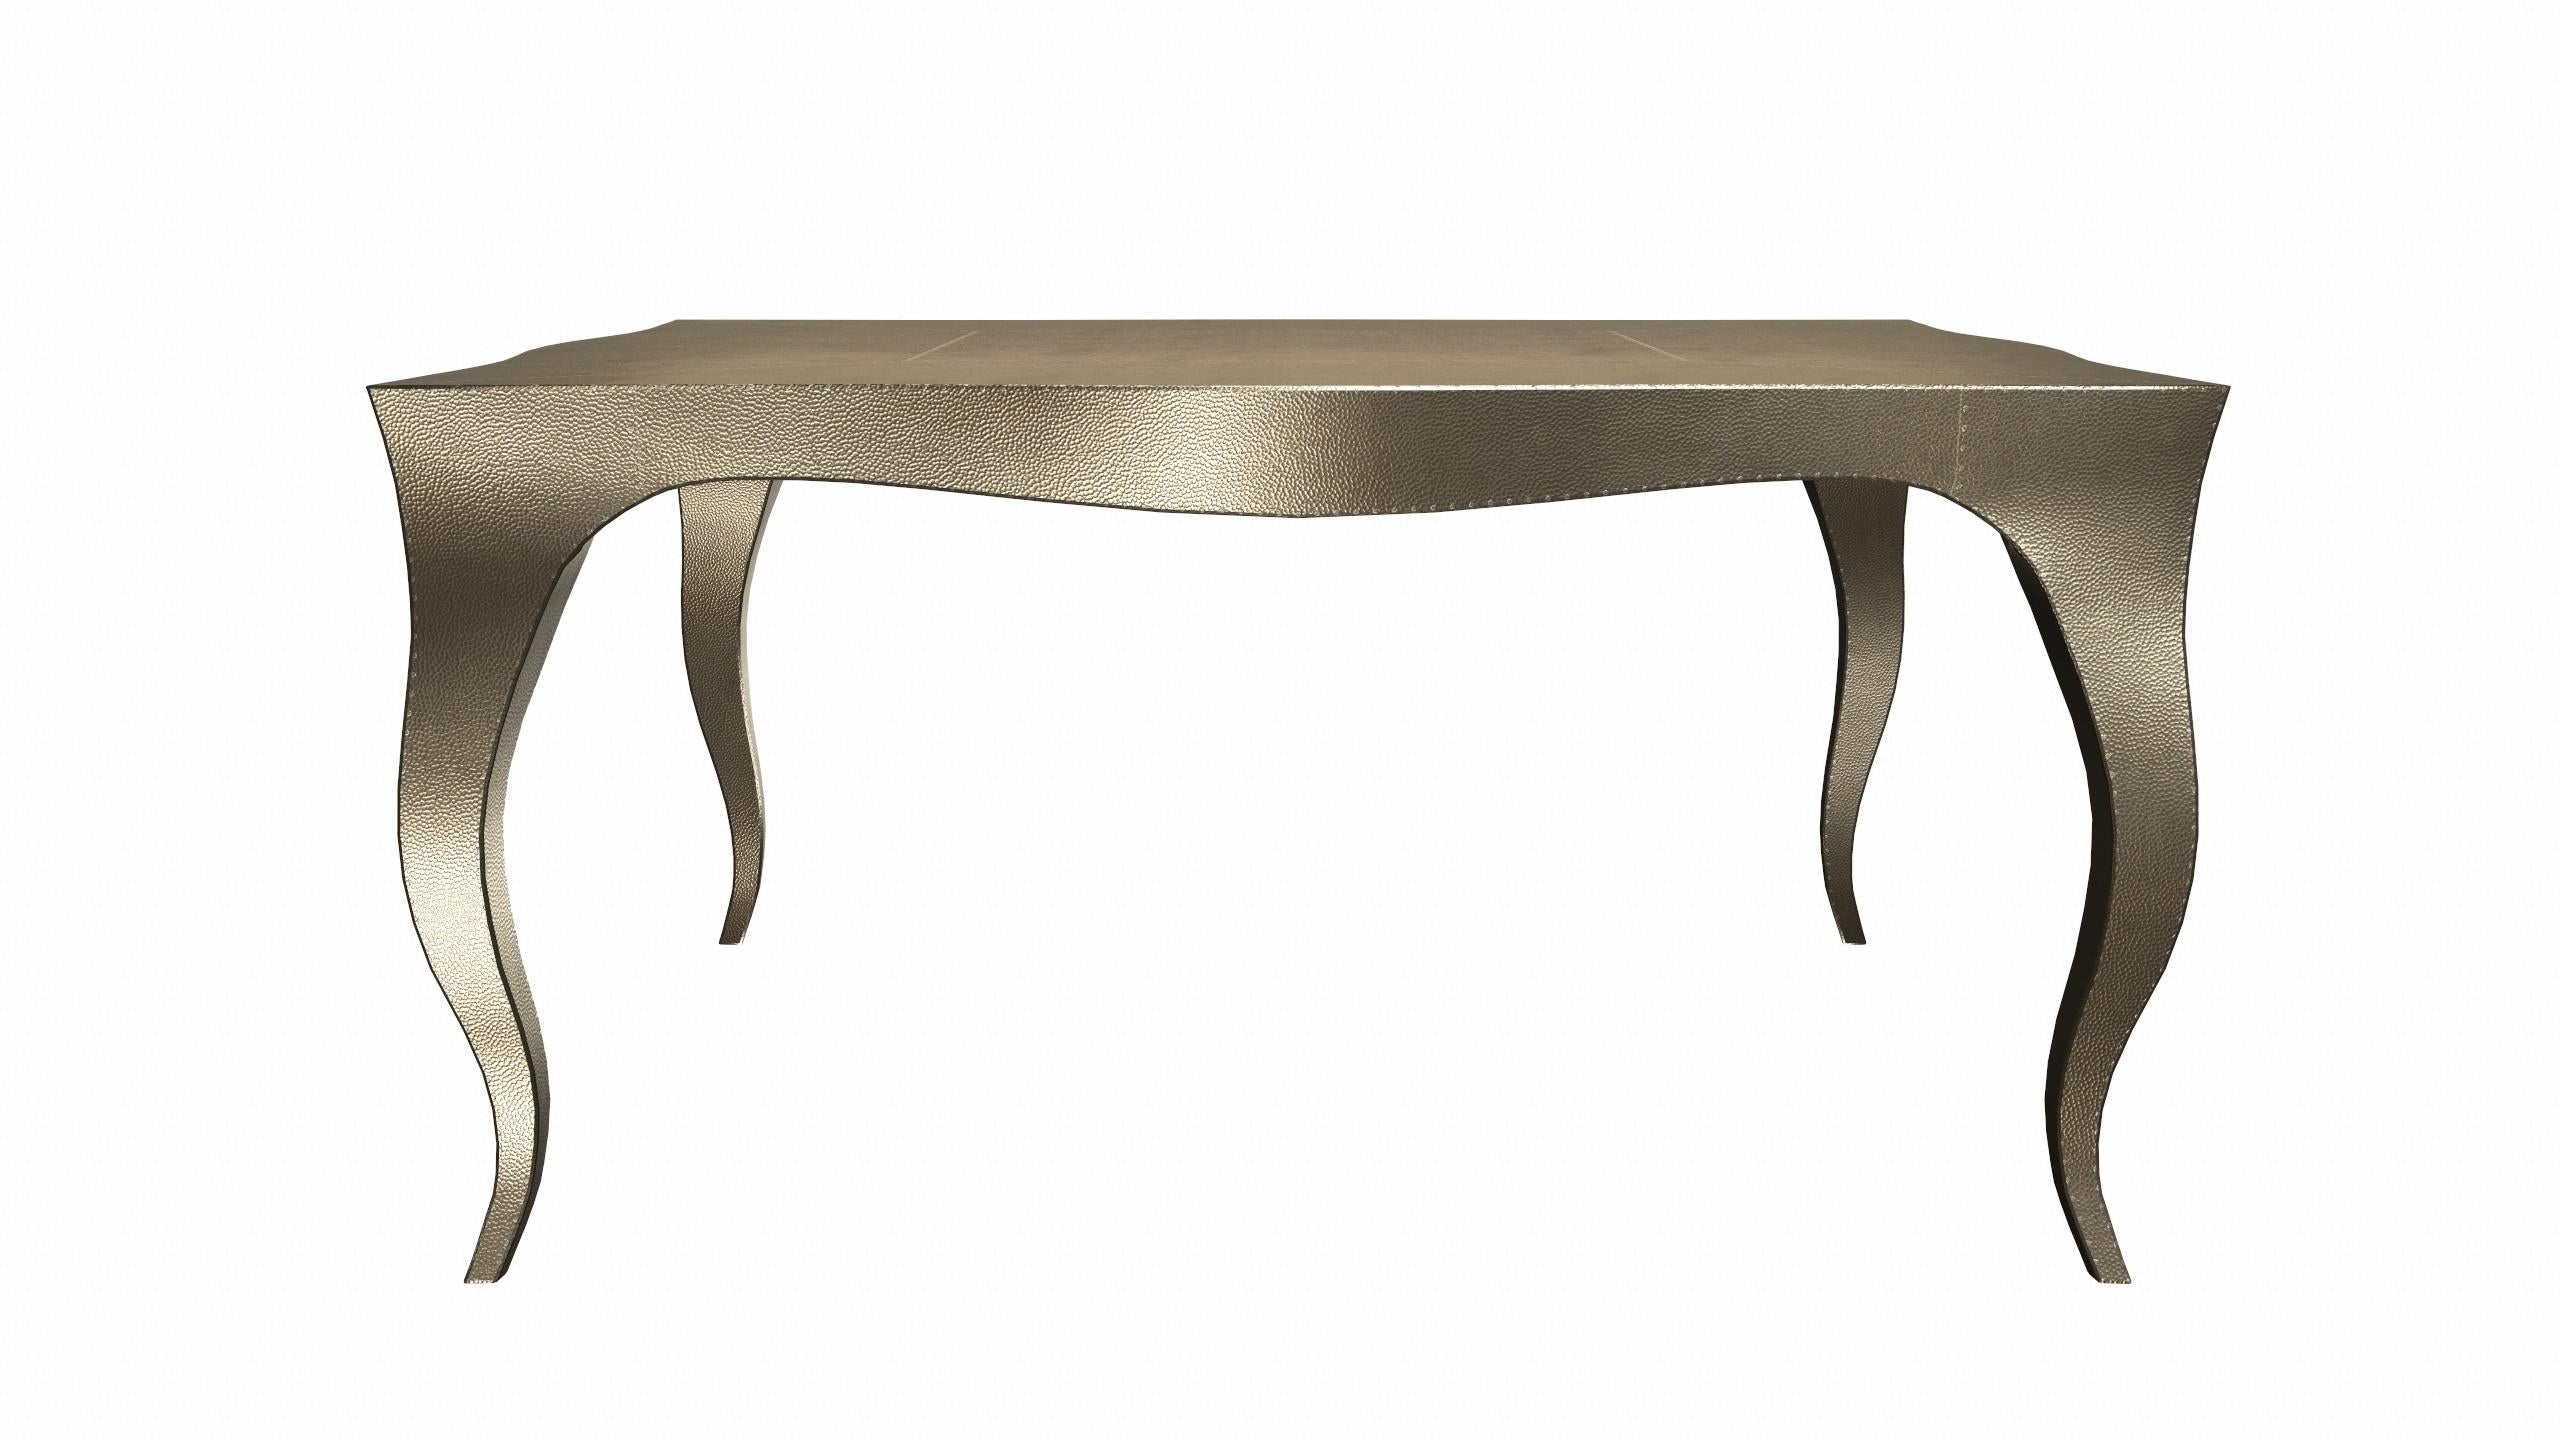 Louise Art Deco Nesting Tables Mid. Hammered Brass 18.5x18.5x10 inch by Paul M. For Sale 1